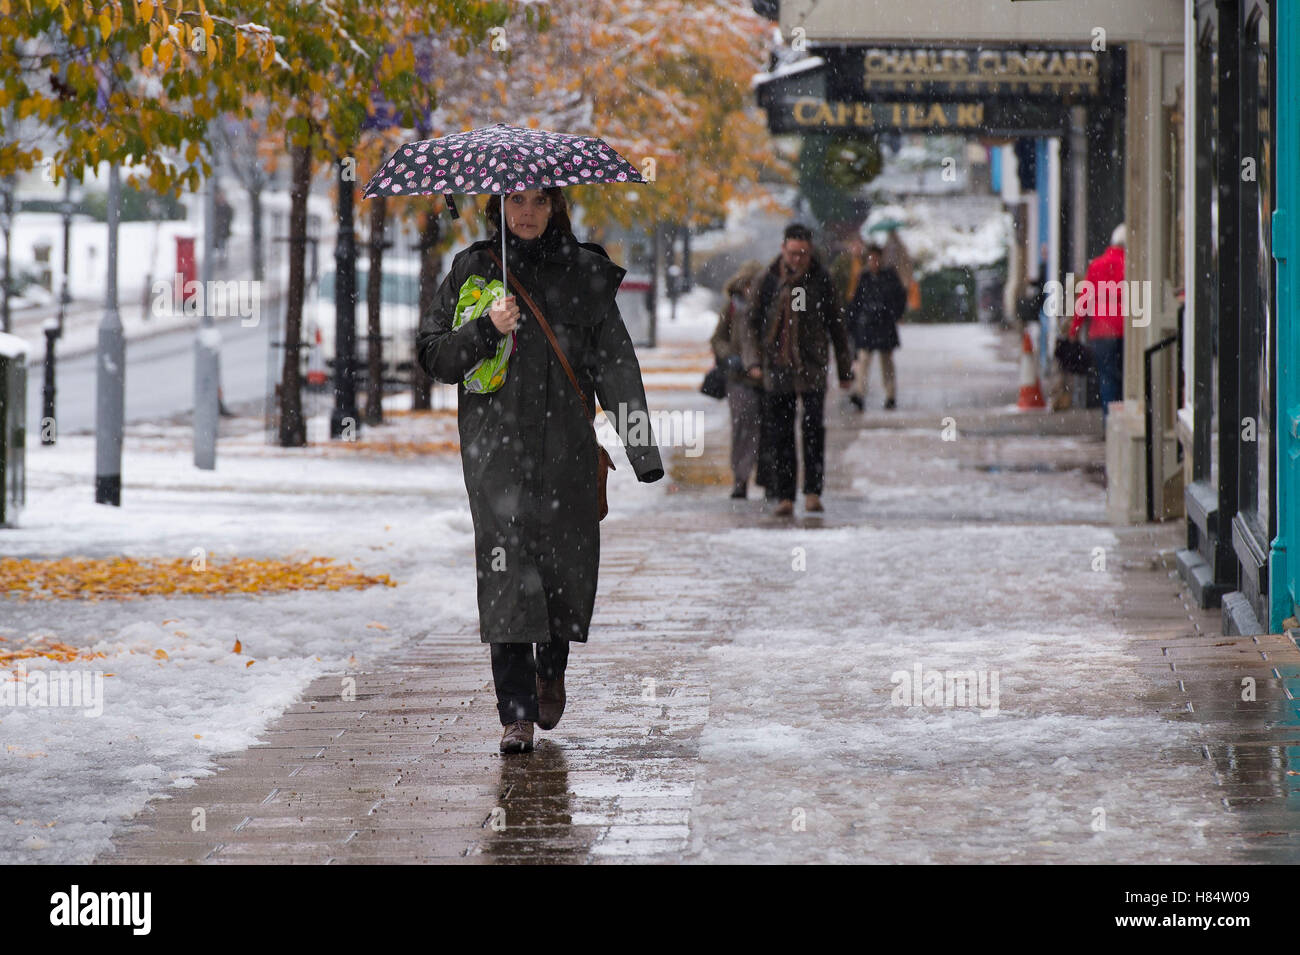 Ilkley, West Yorkshire, UK. 9th November 2016. It is snowing and pedestrians (wearing boots, winter coats and holding umbrellas) are walking past shops on The Grove - Ilkley's first snowfall of 2016. Credit:  Ian Lamond/Alamy Live News Stock Photo